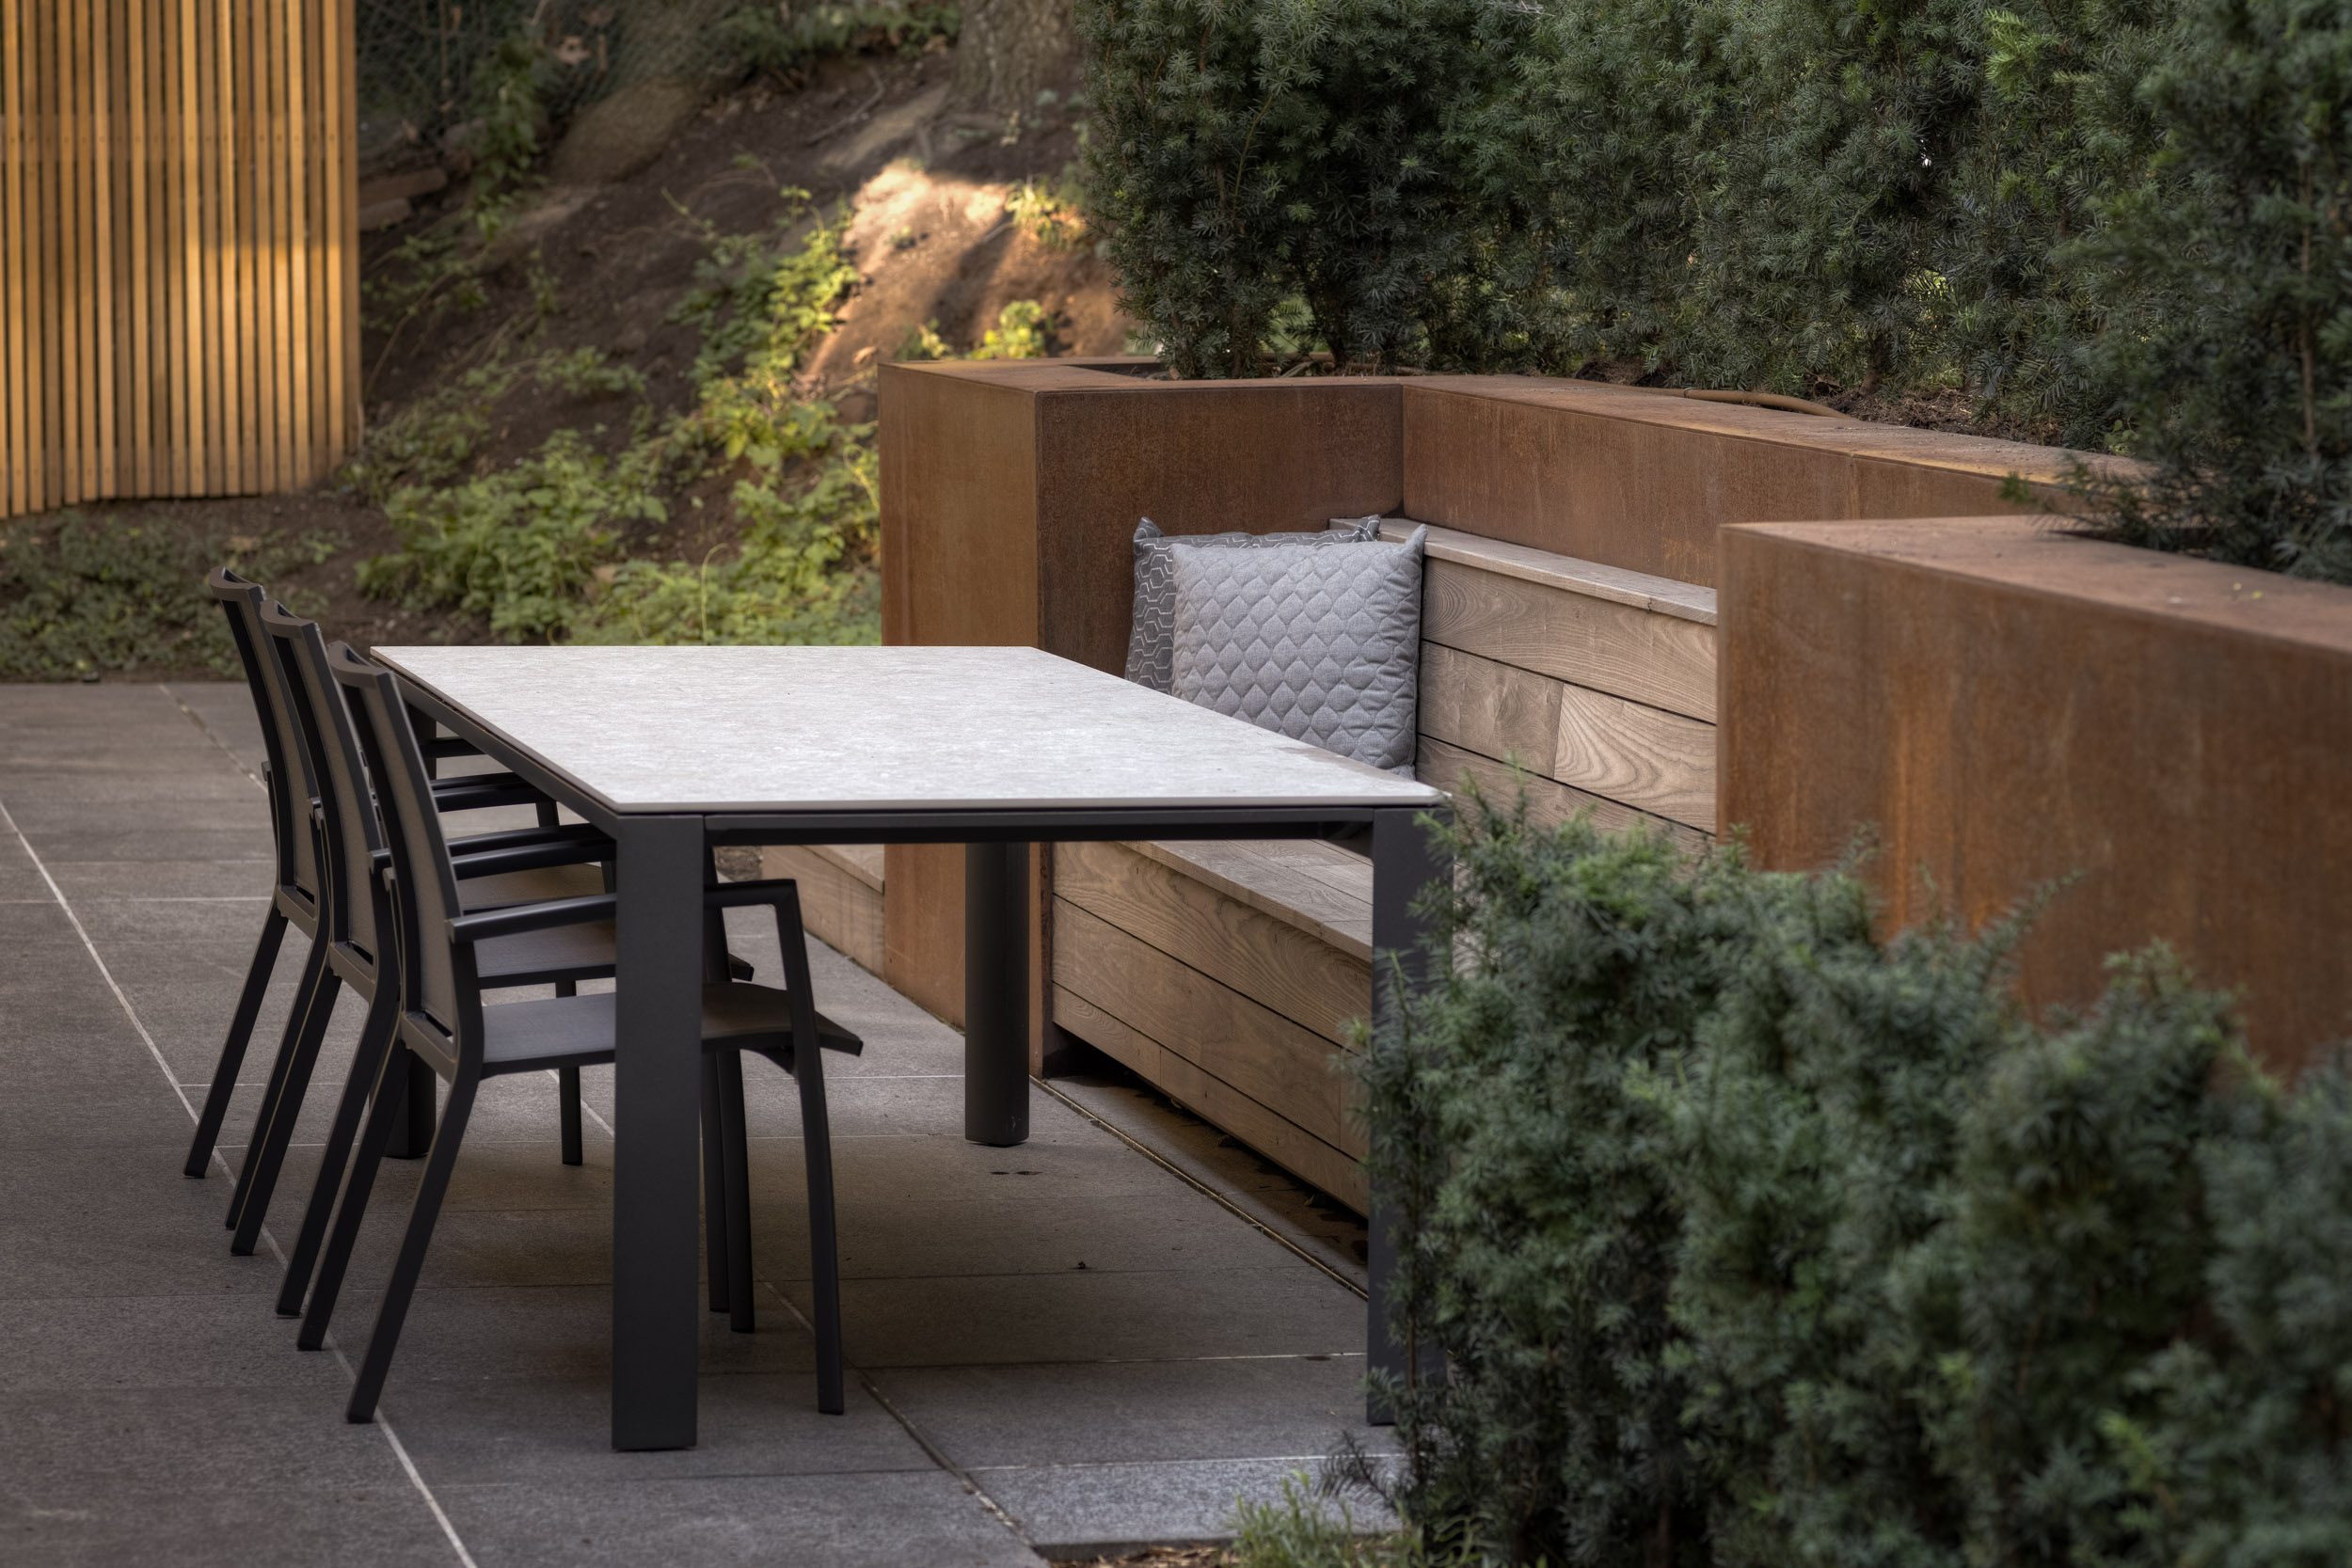 Detail of integrated outdoor seating area with table and chairs. 